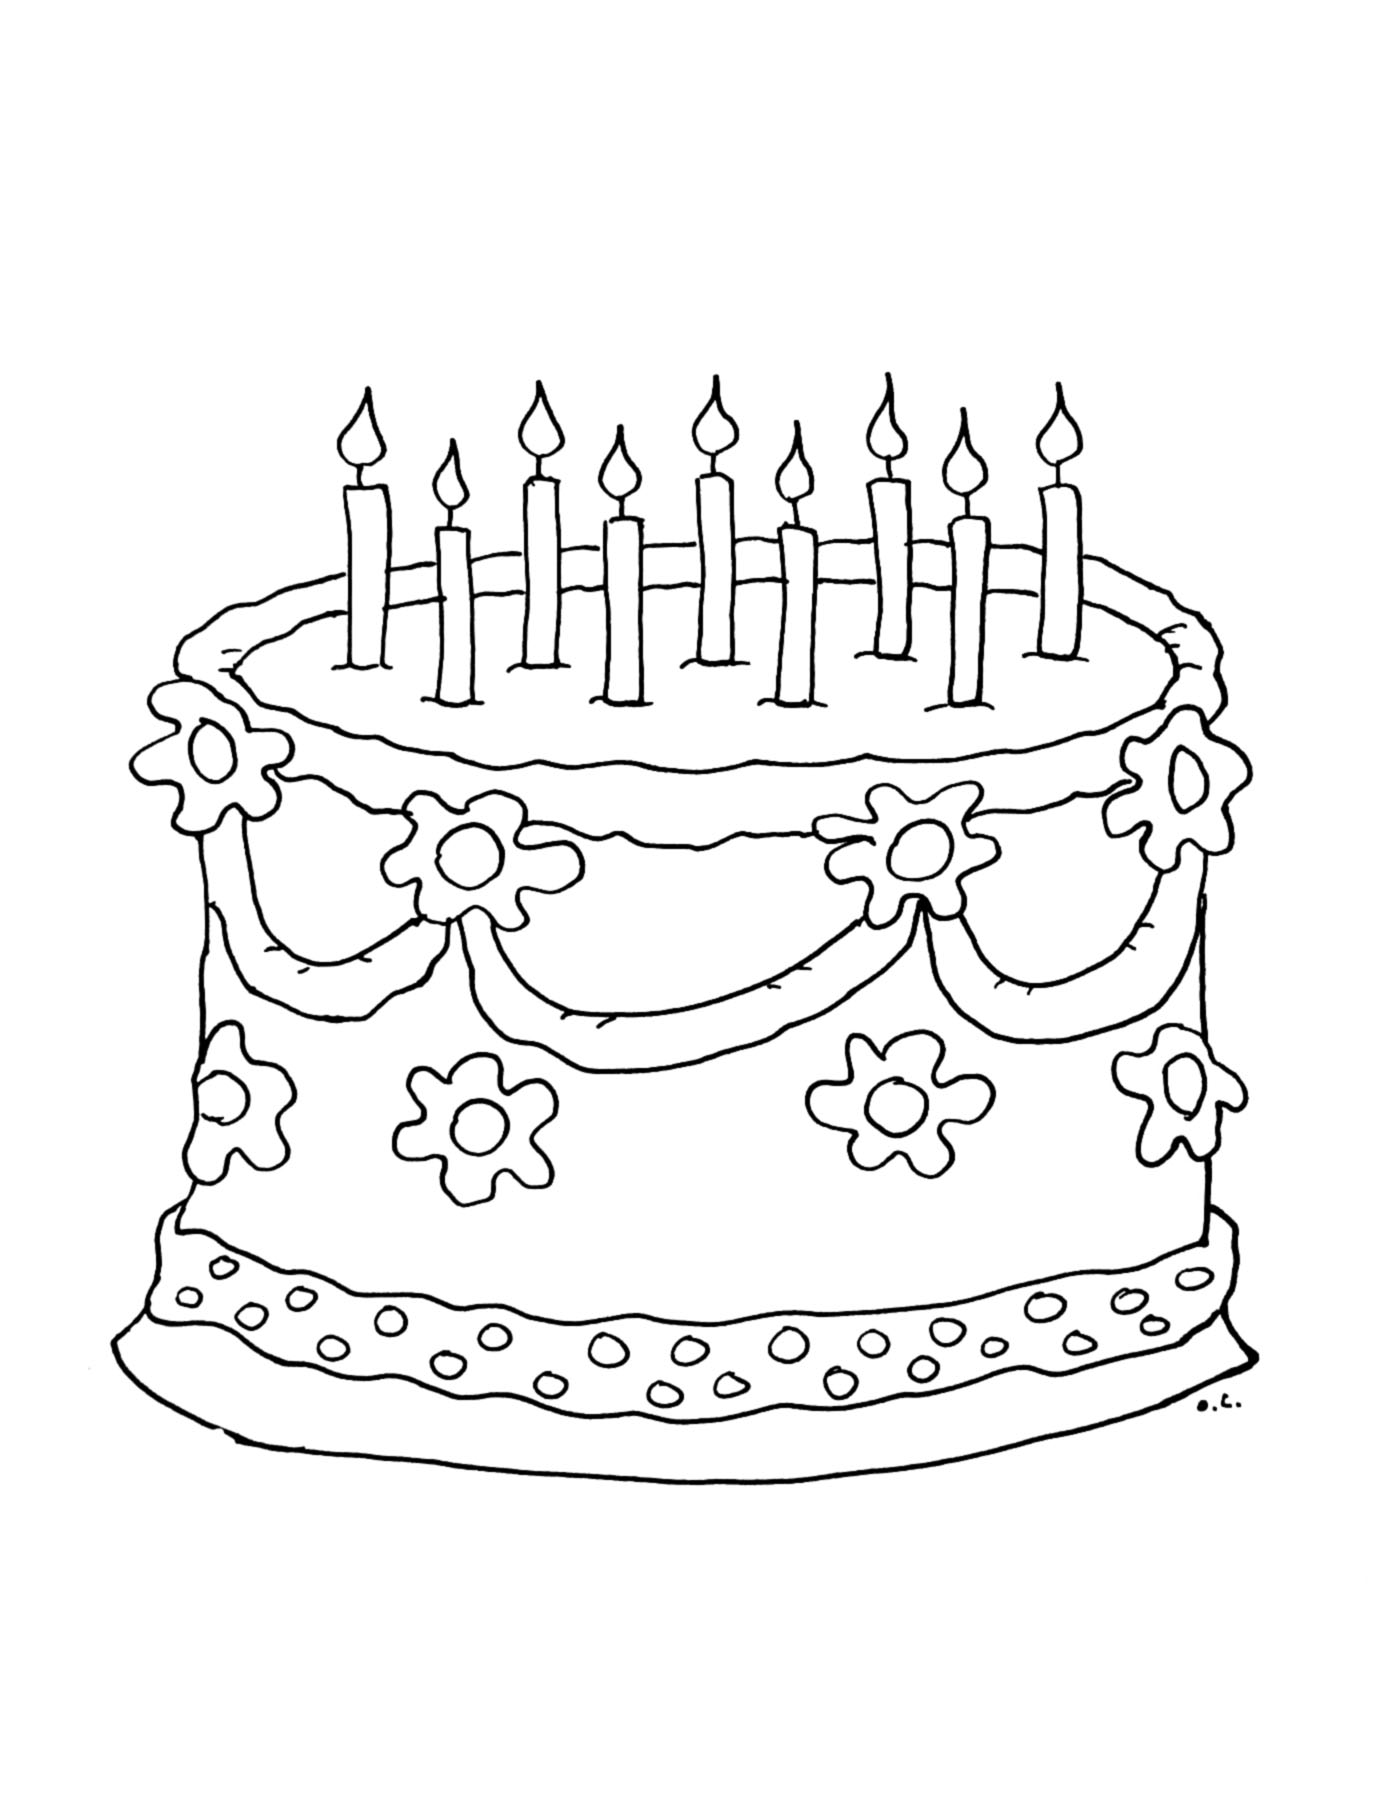 Birthdays To Color For Children Birthdays Kids Coloring Pages